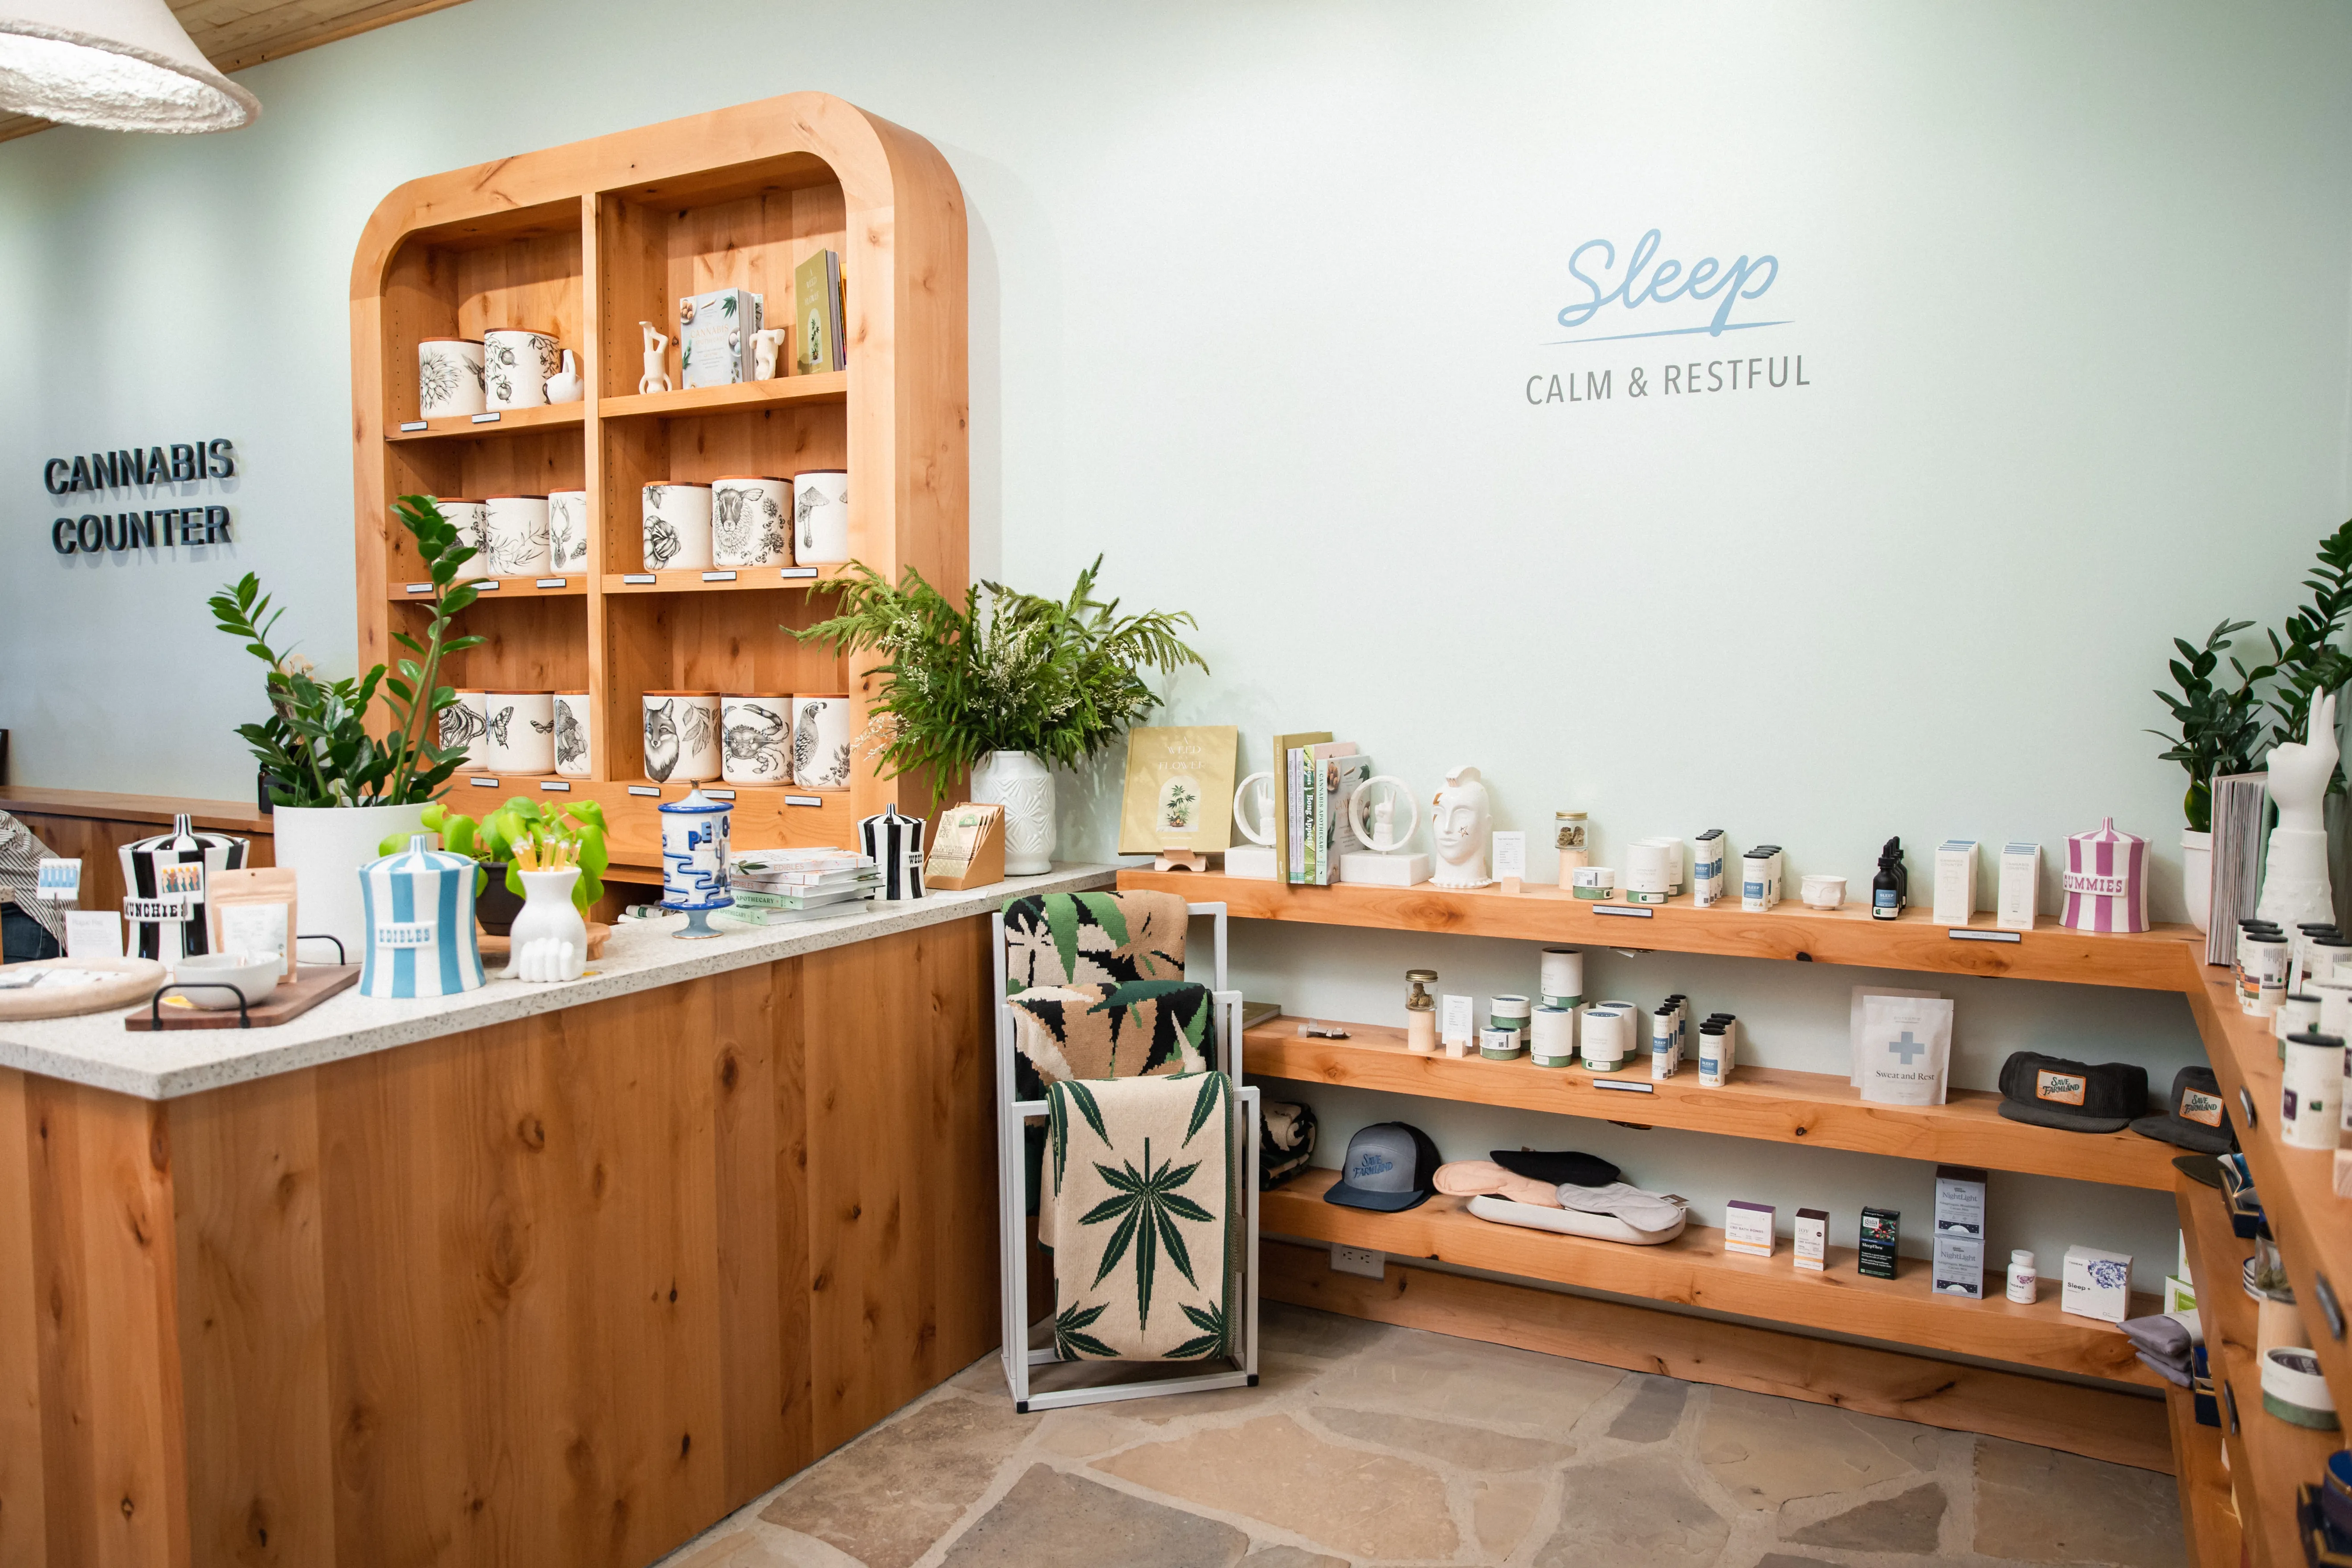 Cannabis Counter in USA, north_america | Cannabis Products - Country Helper